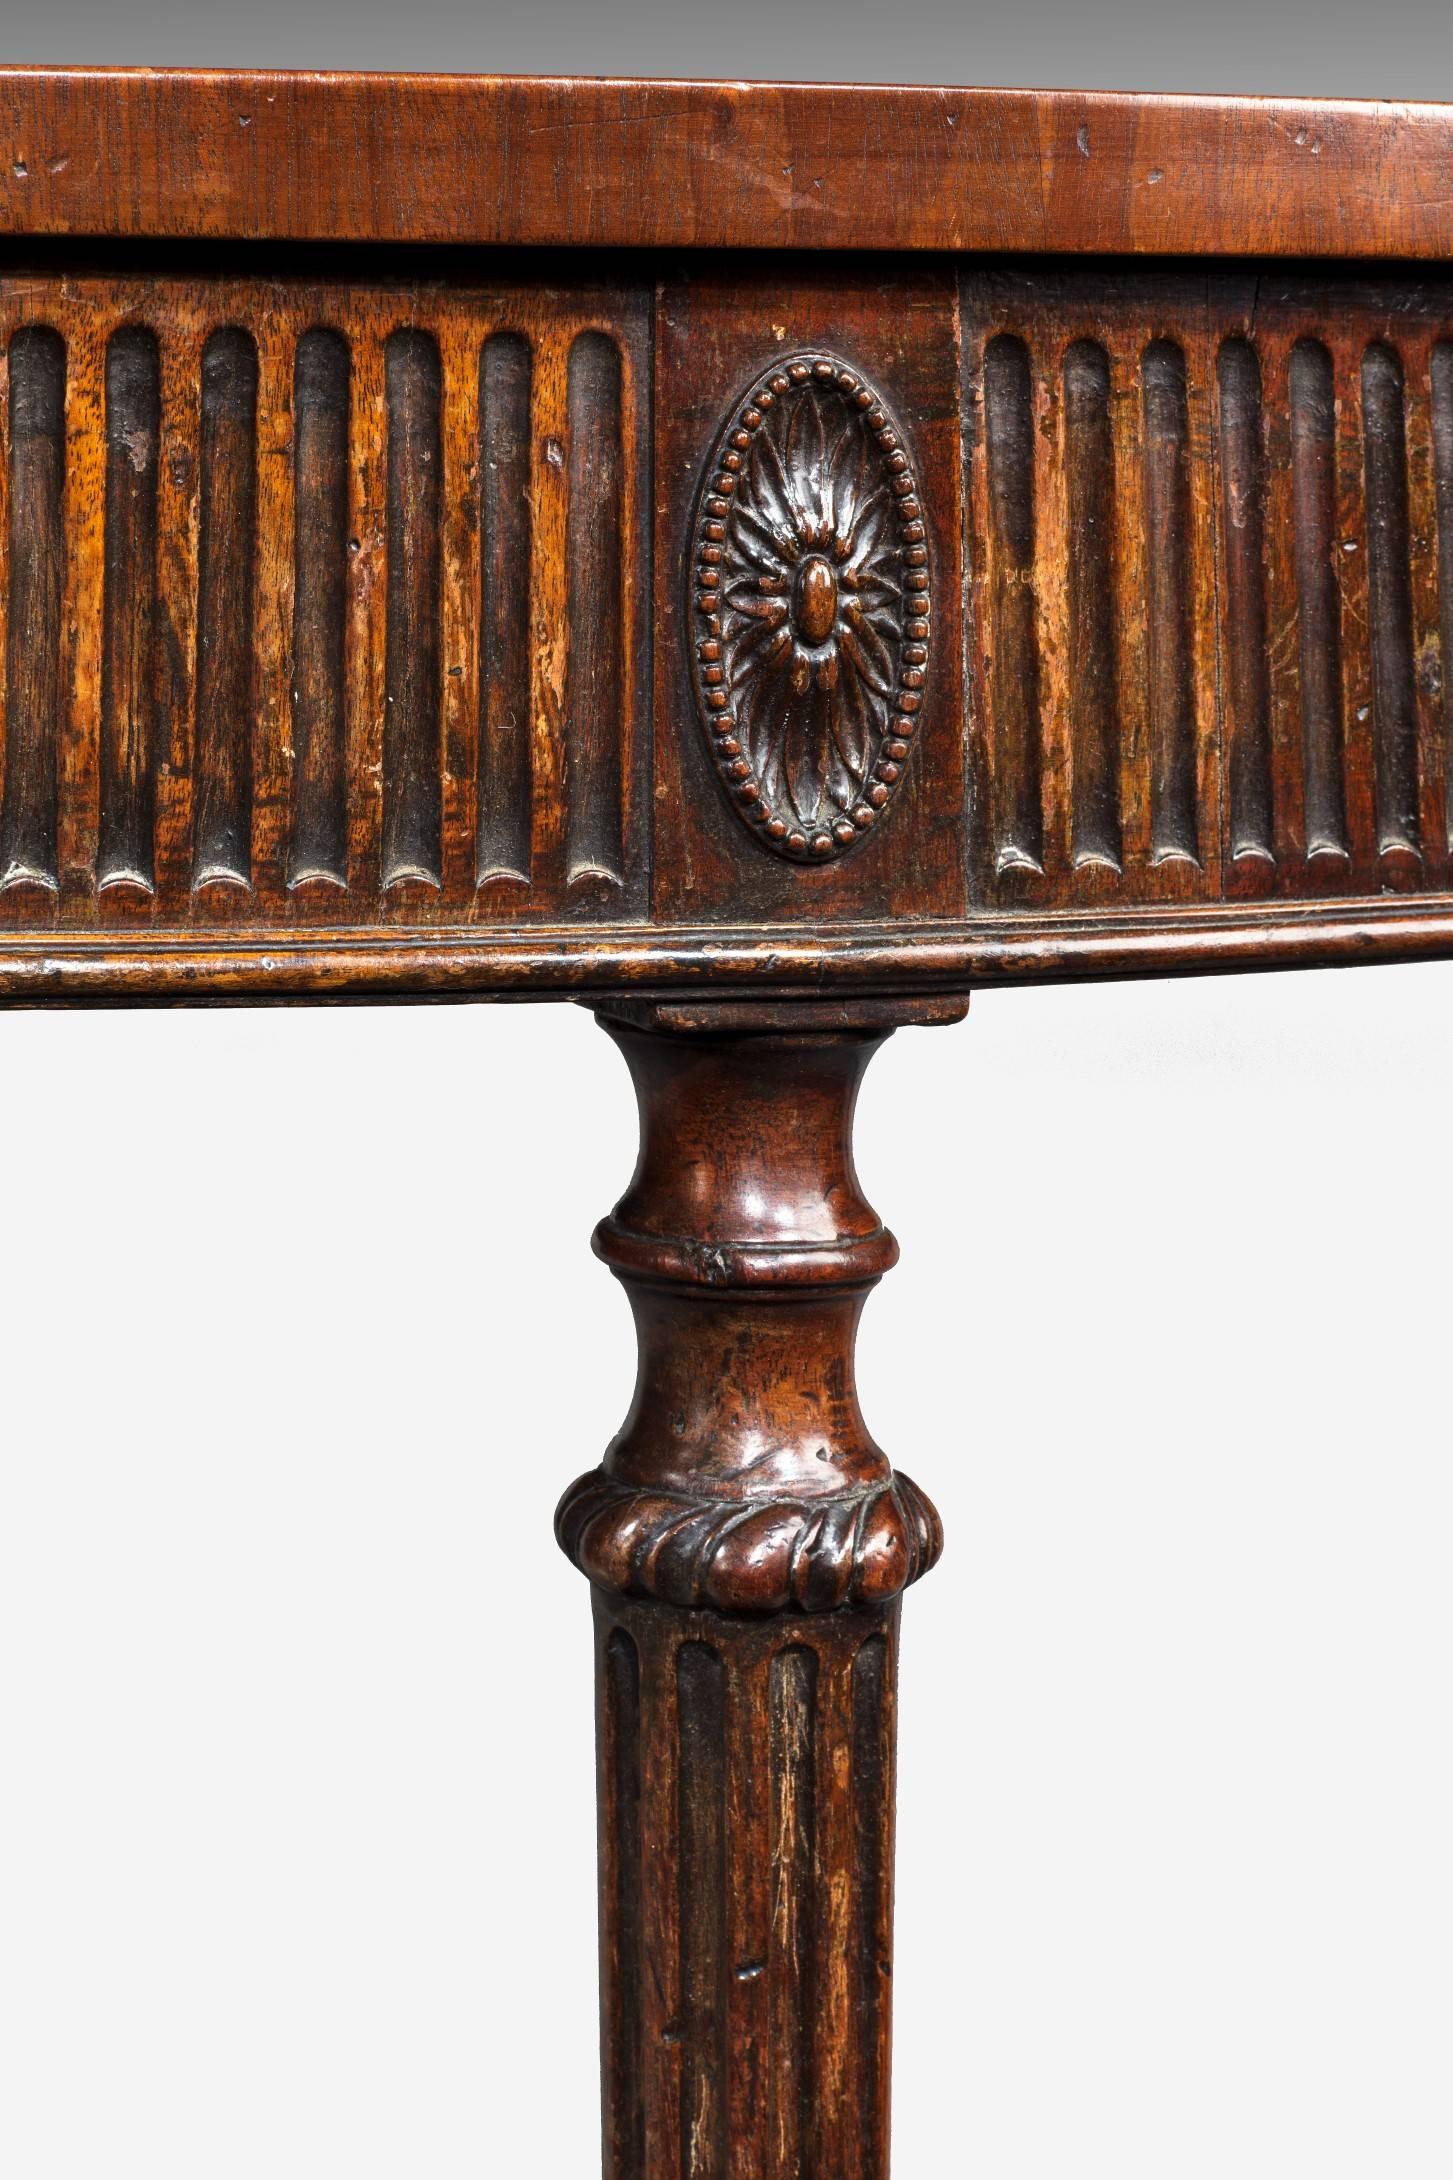 An elegant George III Adam period mahogany demilune console table; the console table's well figured fiddle back mahogany top above a fluted frieze centred by an entablature decorated with a crisply carved neoclassical urn and raised on elegant